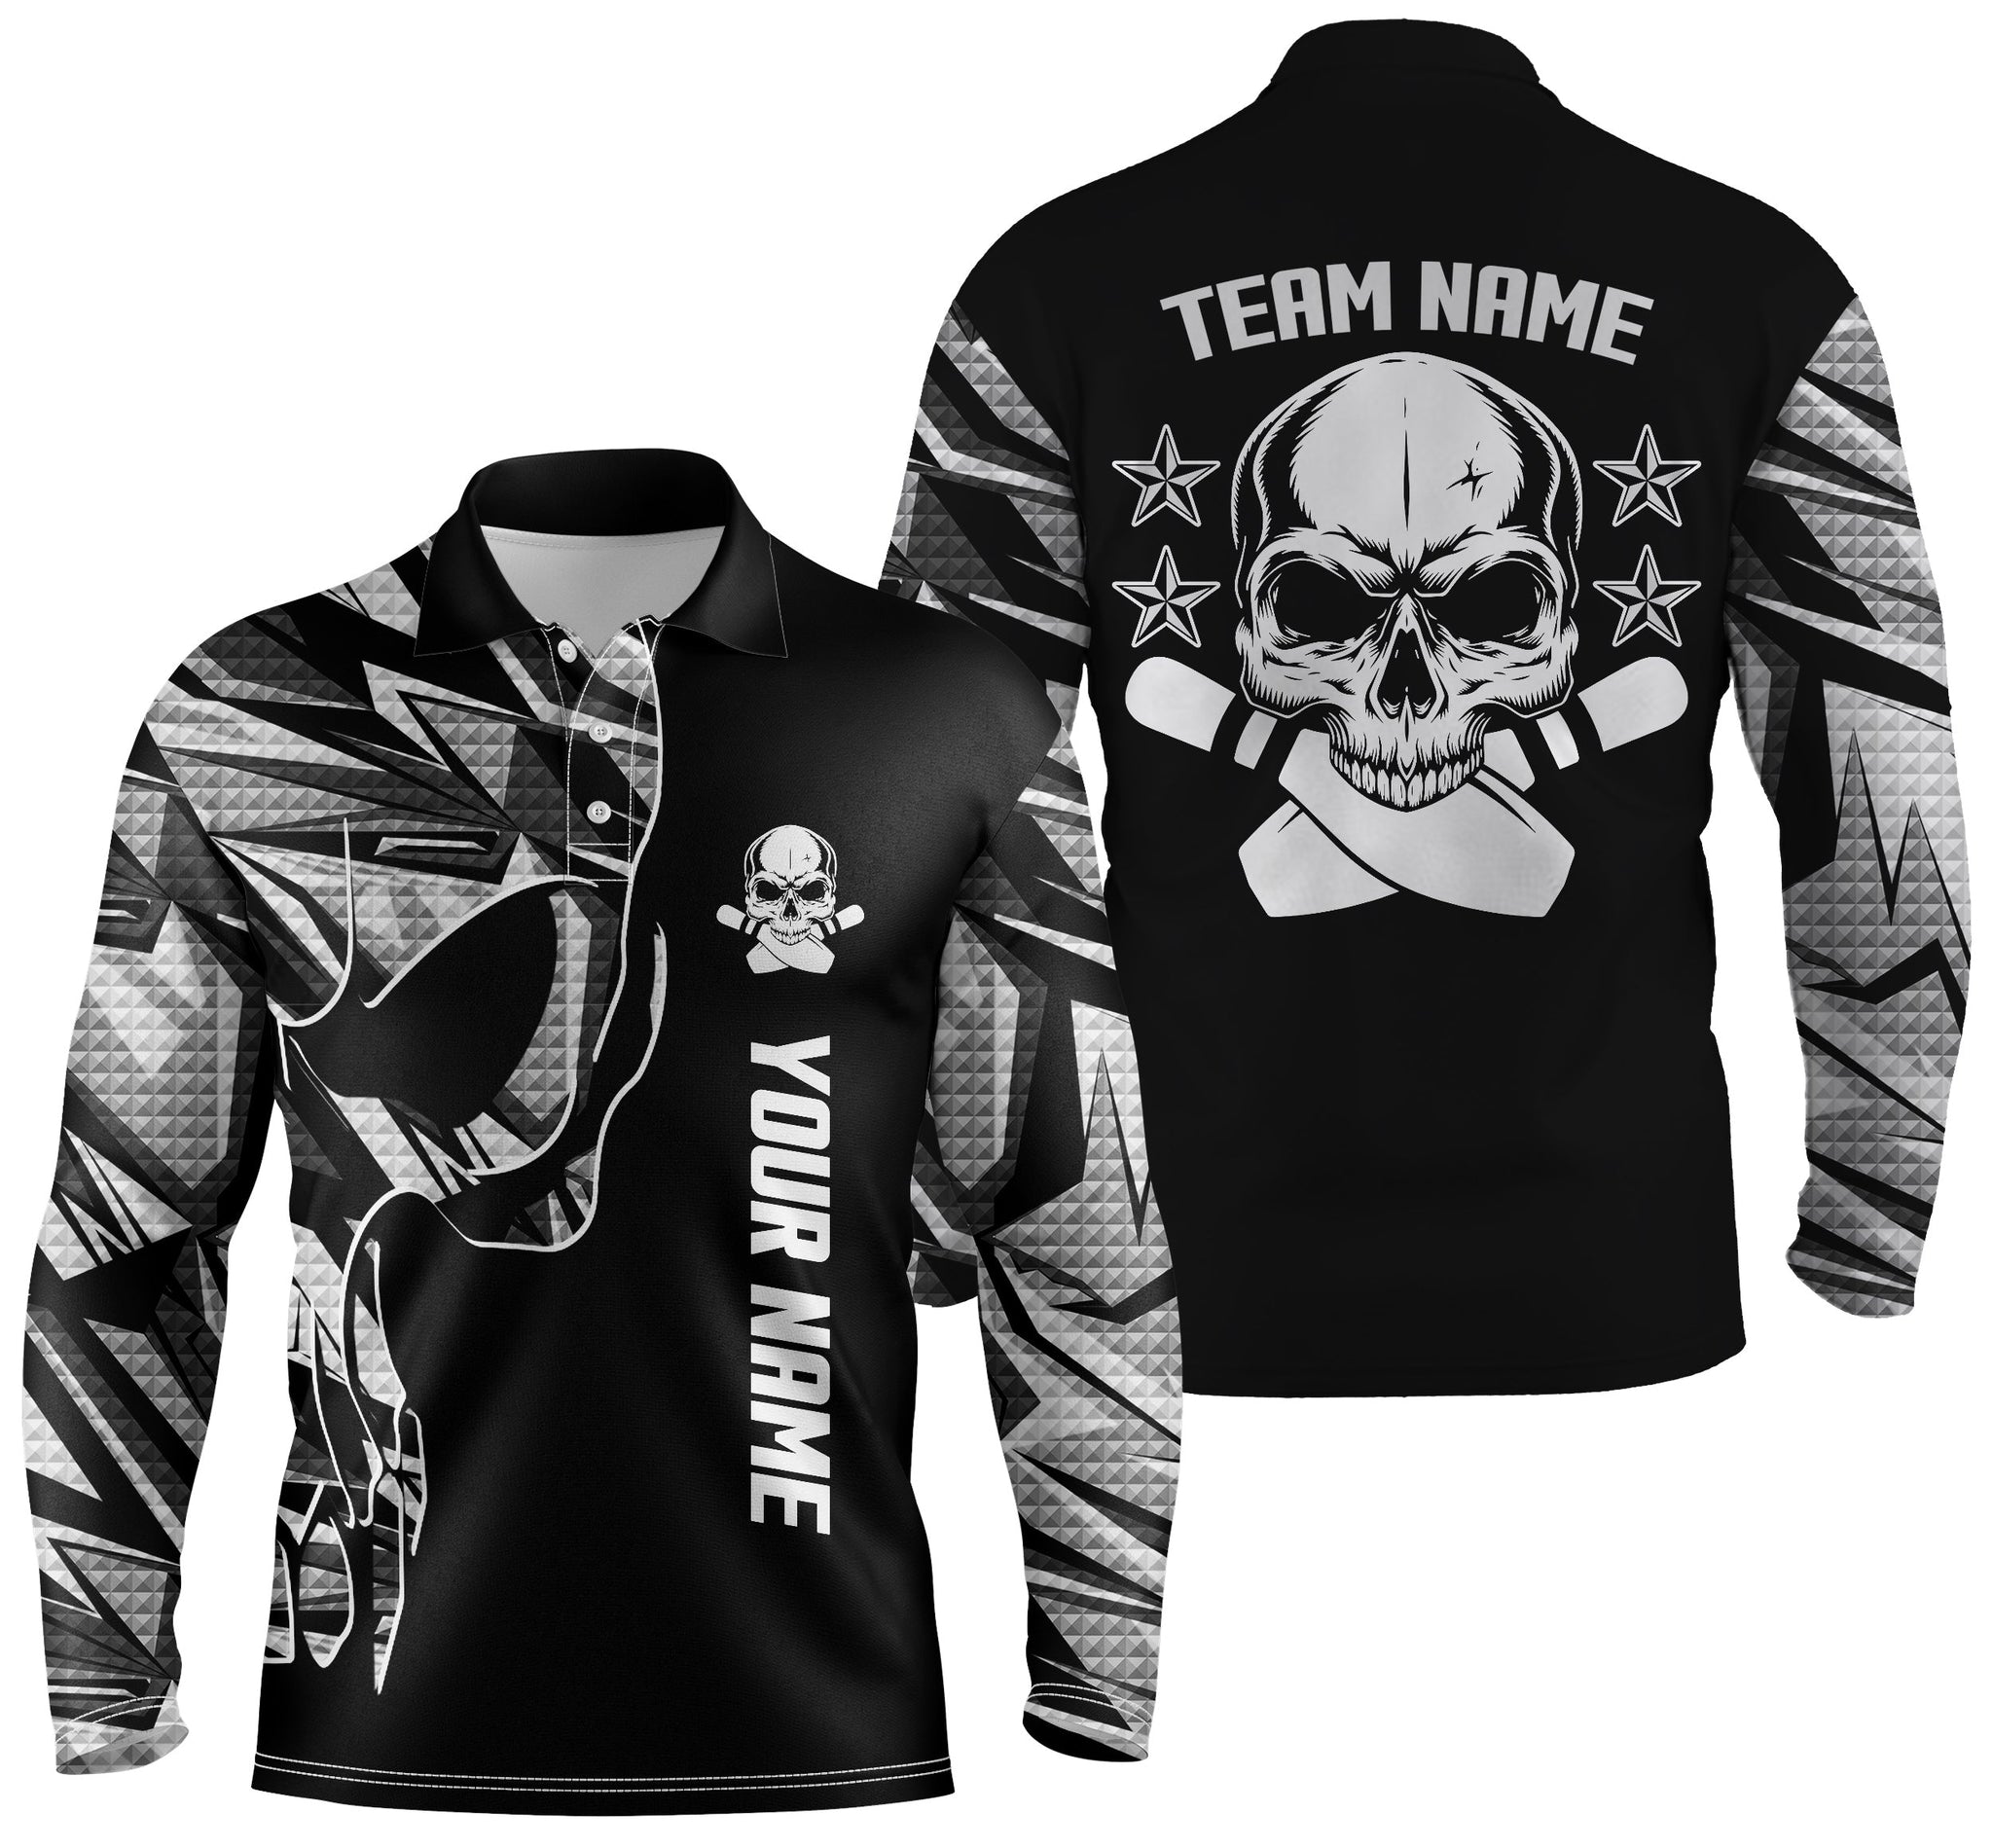 Multi Color Bowling Long Sleeve Polo Shirts For Men Custom Name And Team Name Skull Bowling/ Team Bowling Shirts